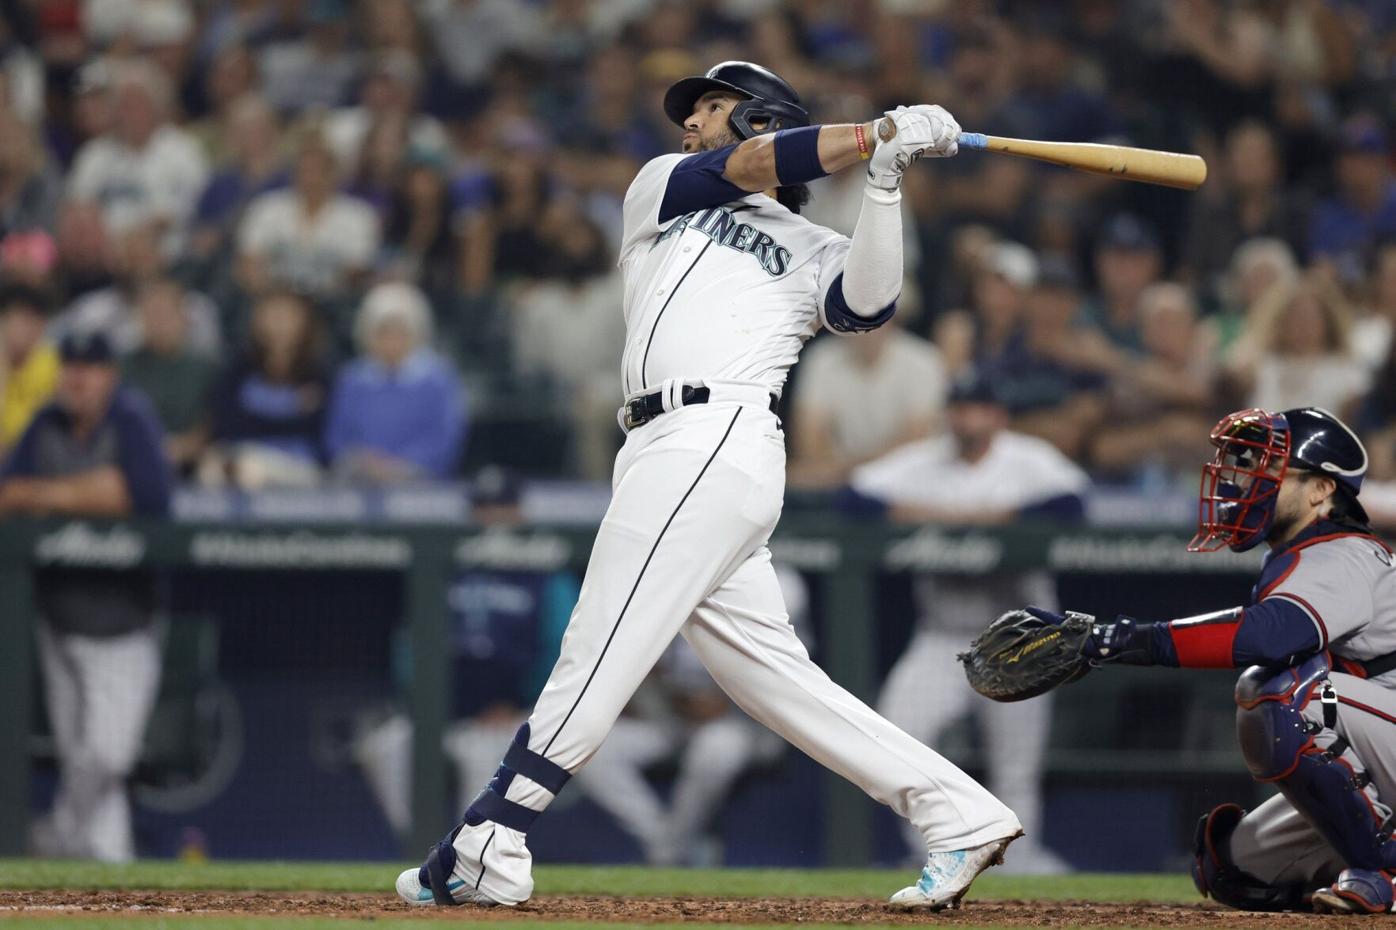 Eugenio Suarez's role in Mariners' 2022 success more than 'good vibes', Mariners